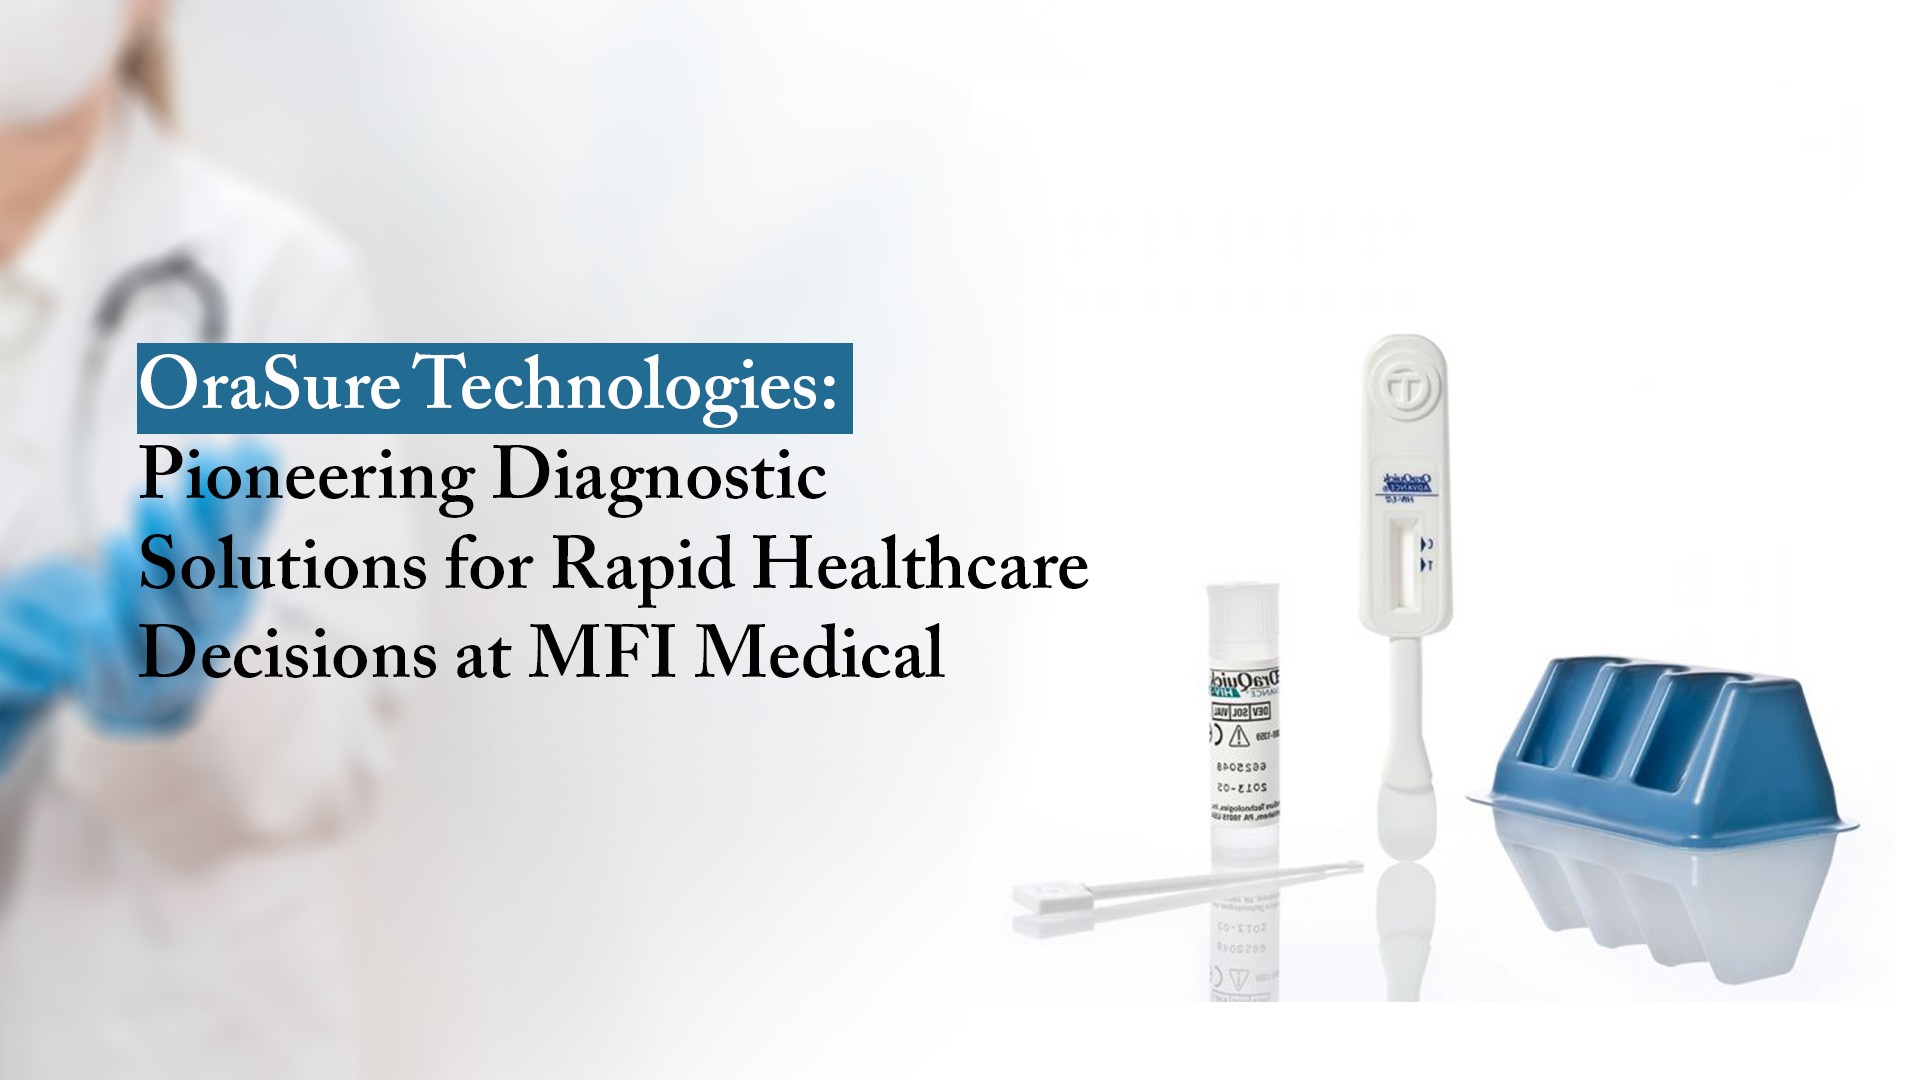 OraSure Technologies for Diagnostic Solutions for Rapid Healthcare Decisions at MFI Medical